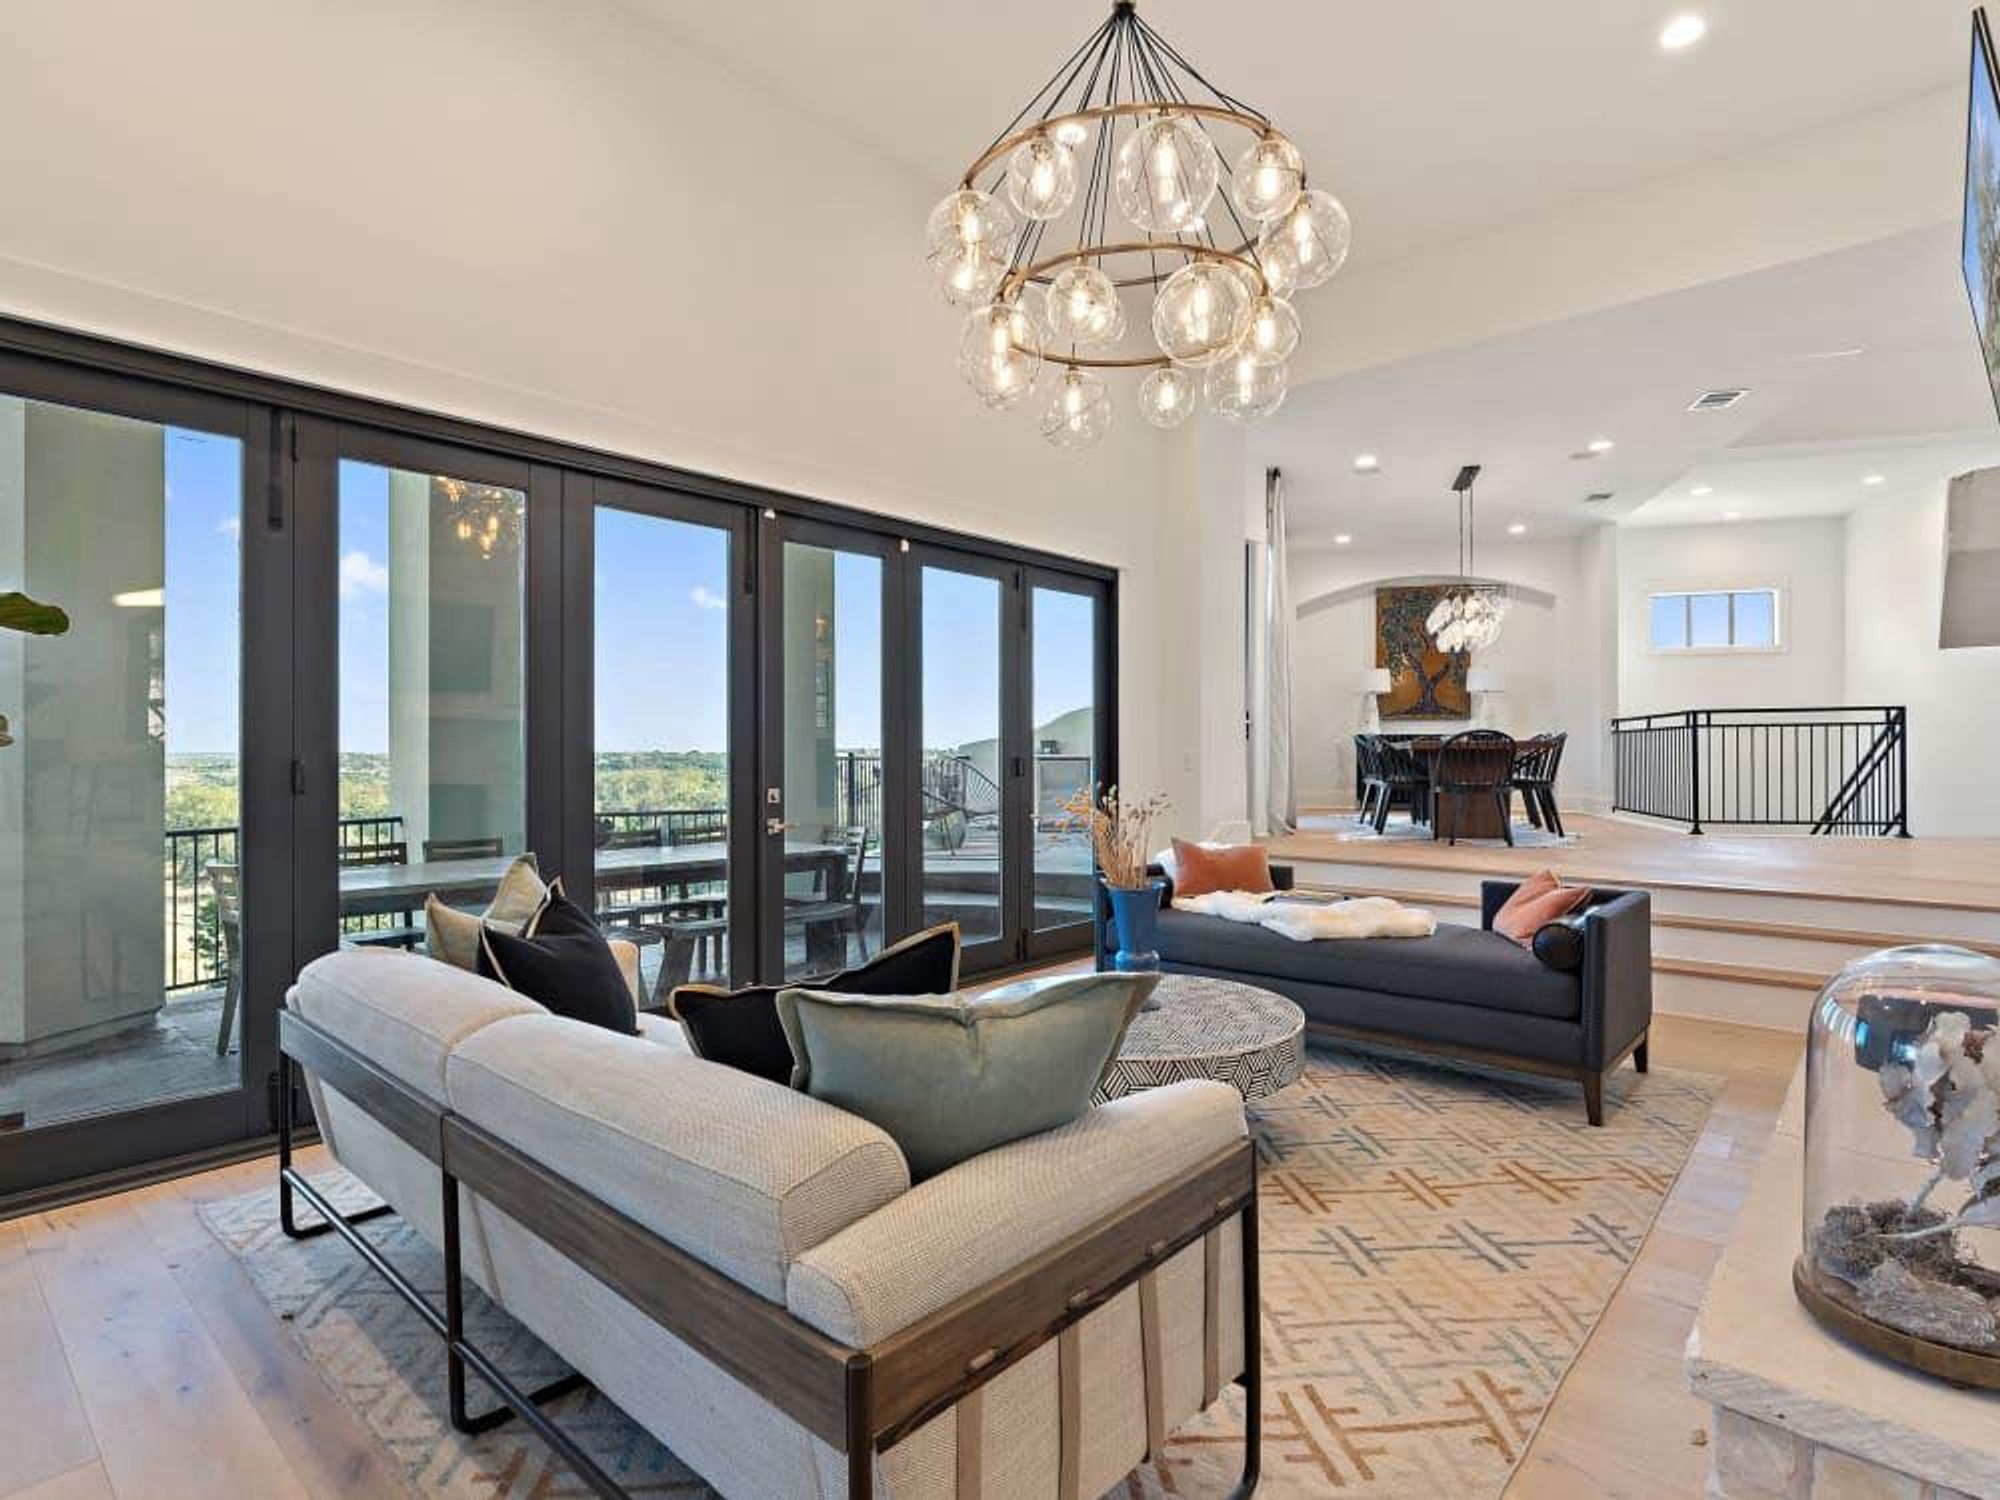 8133 Magnolia Ridge Cove is listed for $2,995,000.